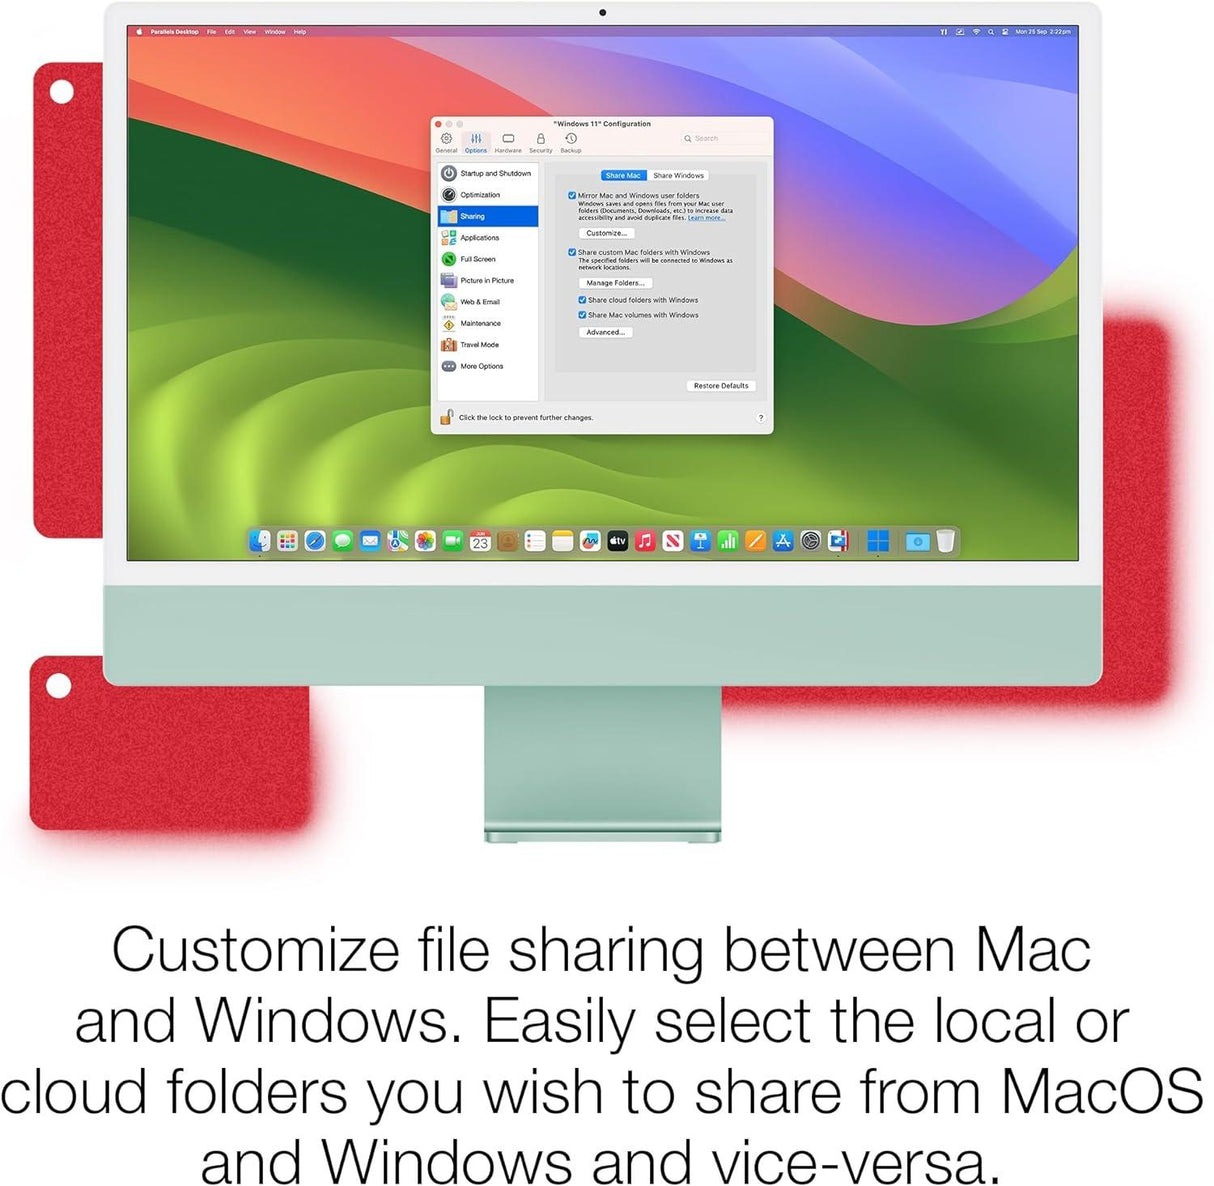 Parallels Desktop 19 for Mac - Instant Download for Mac (1 Computer) - SoftwareCW - Authorized Reseller